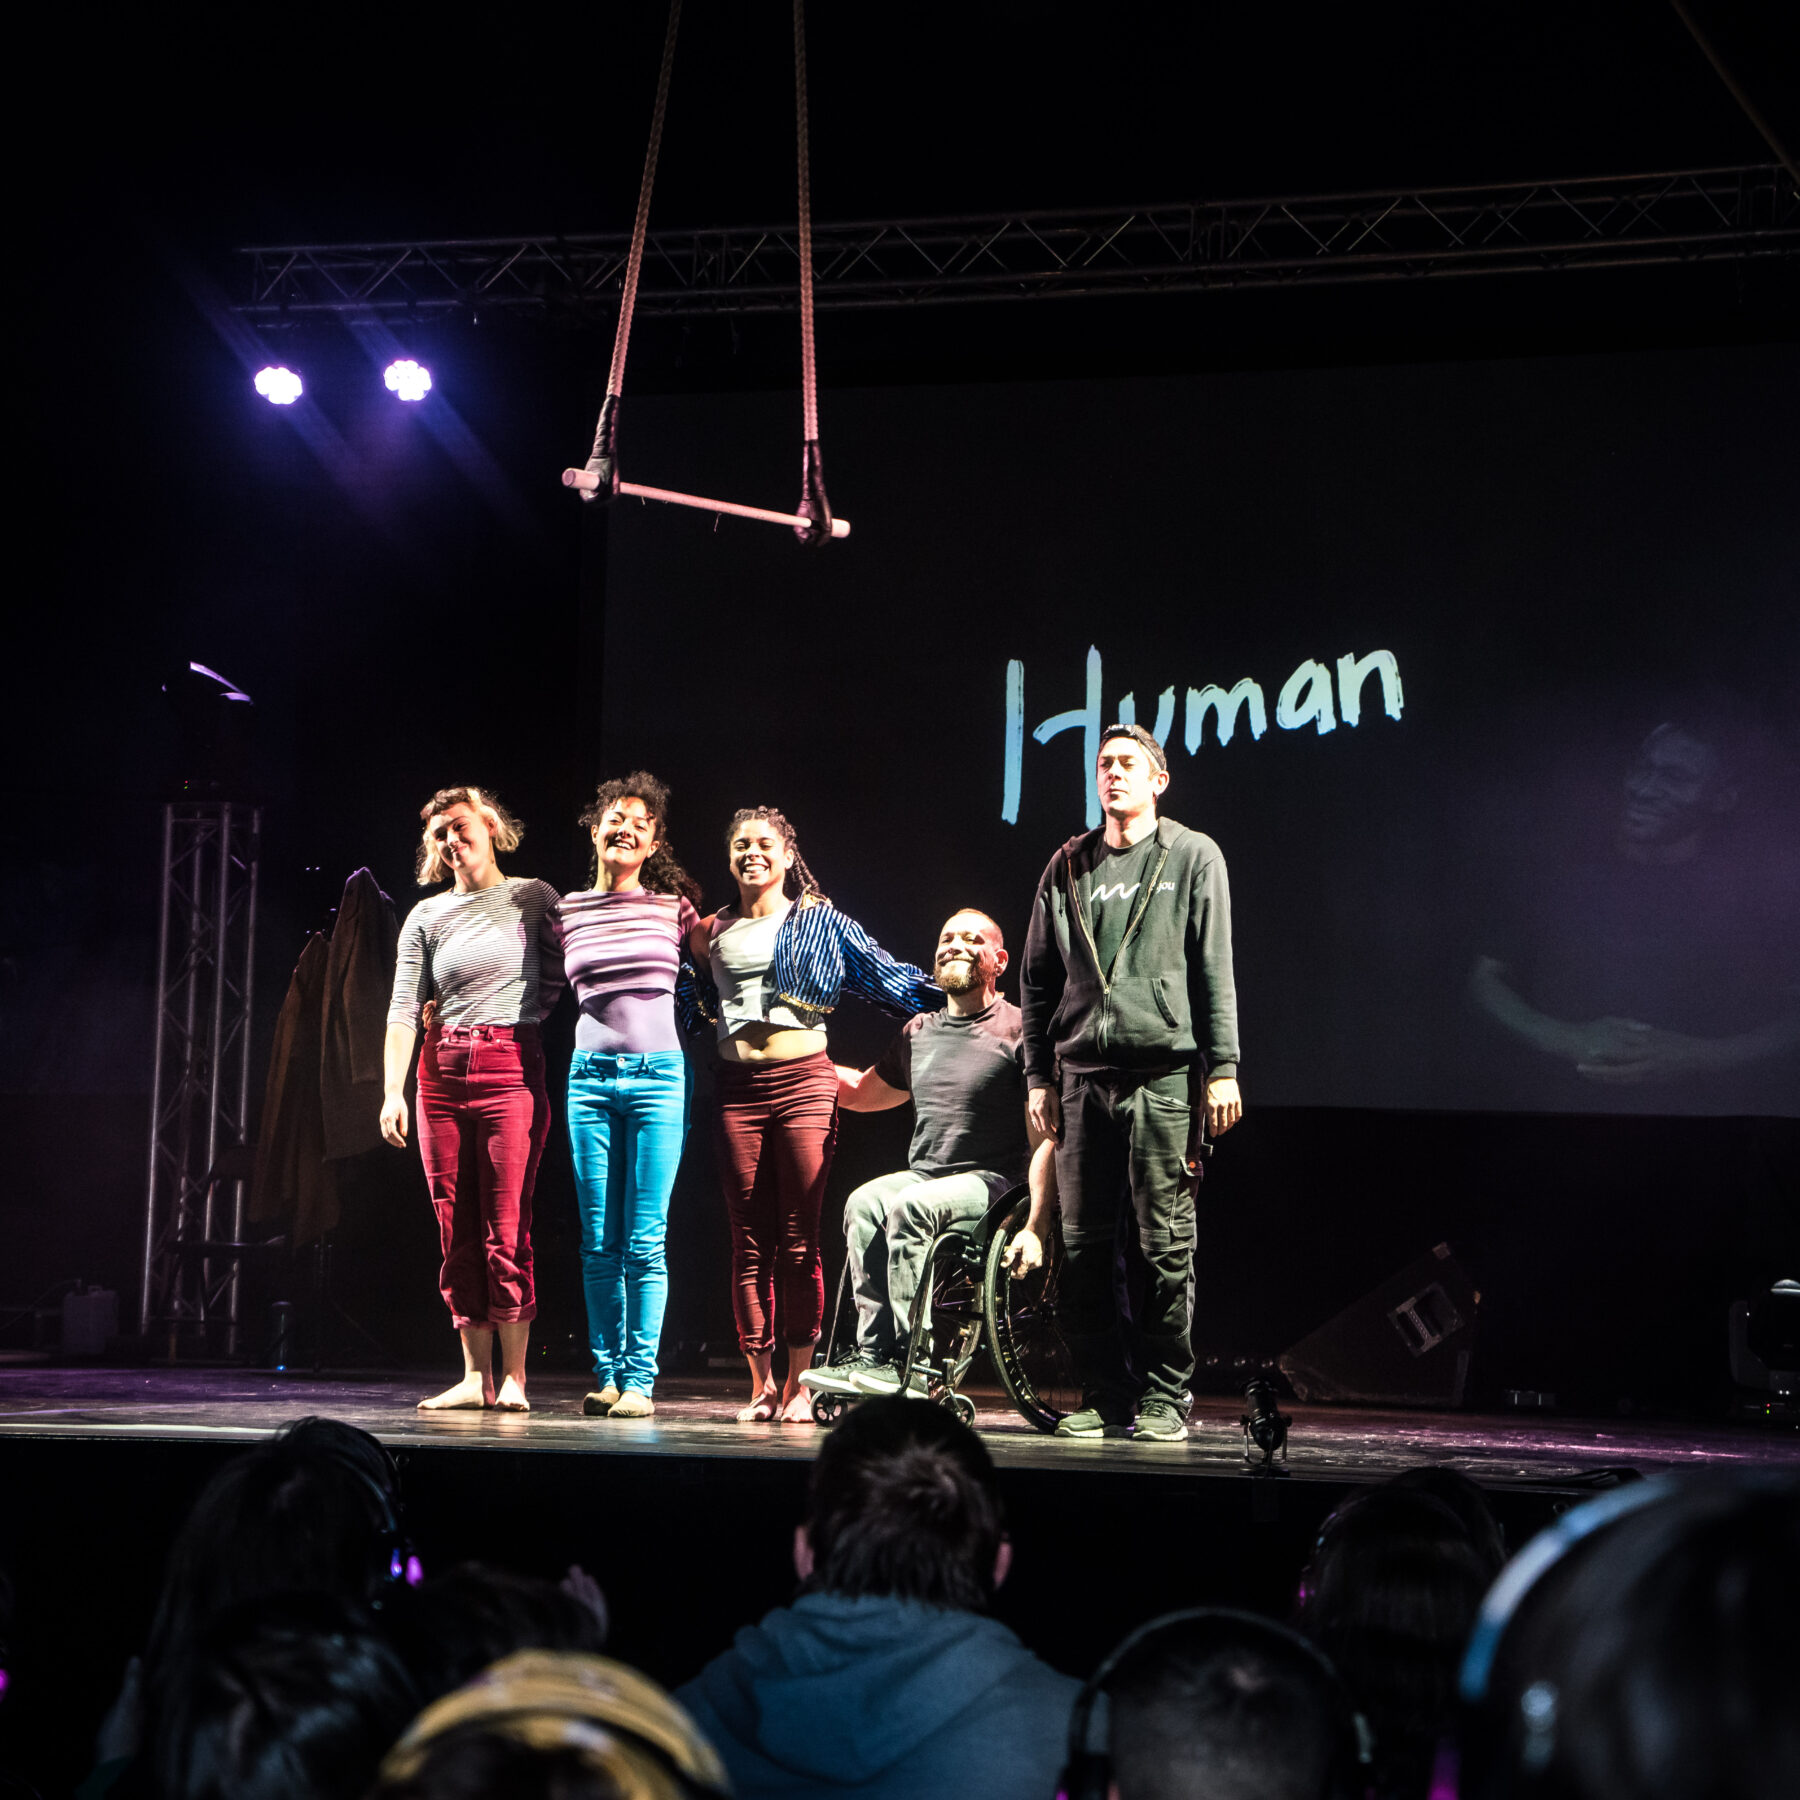 An indoors stage. The space is dark apart from two purple spotlights at the back. Performers stand in line and prepare to bow to the audience, which can be seen in the foreground. Behind them, a screen shows a title in white handwriting: "Human" and a man who BSL interprets. Above, a trapeze can be seen hanging above the performs.